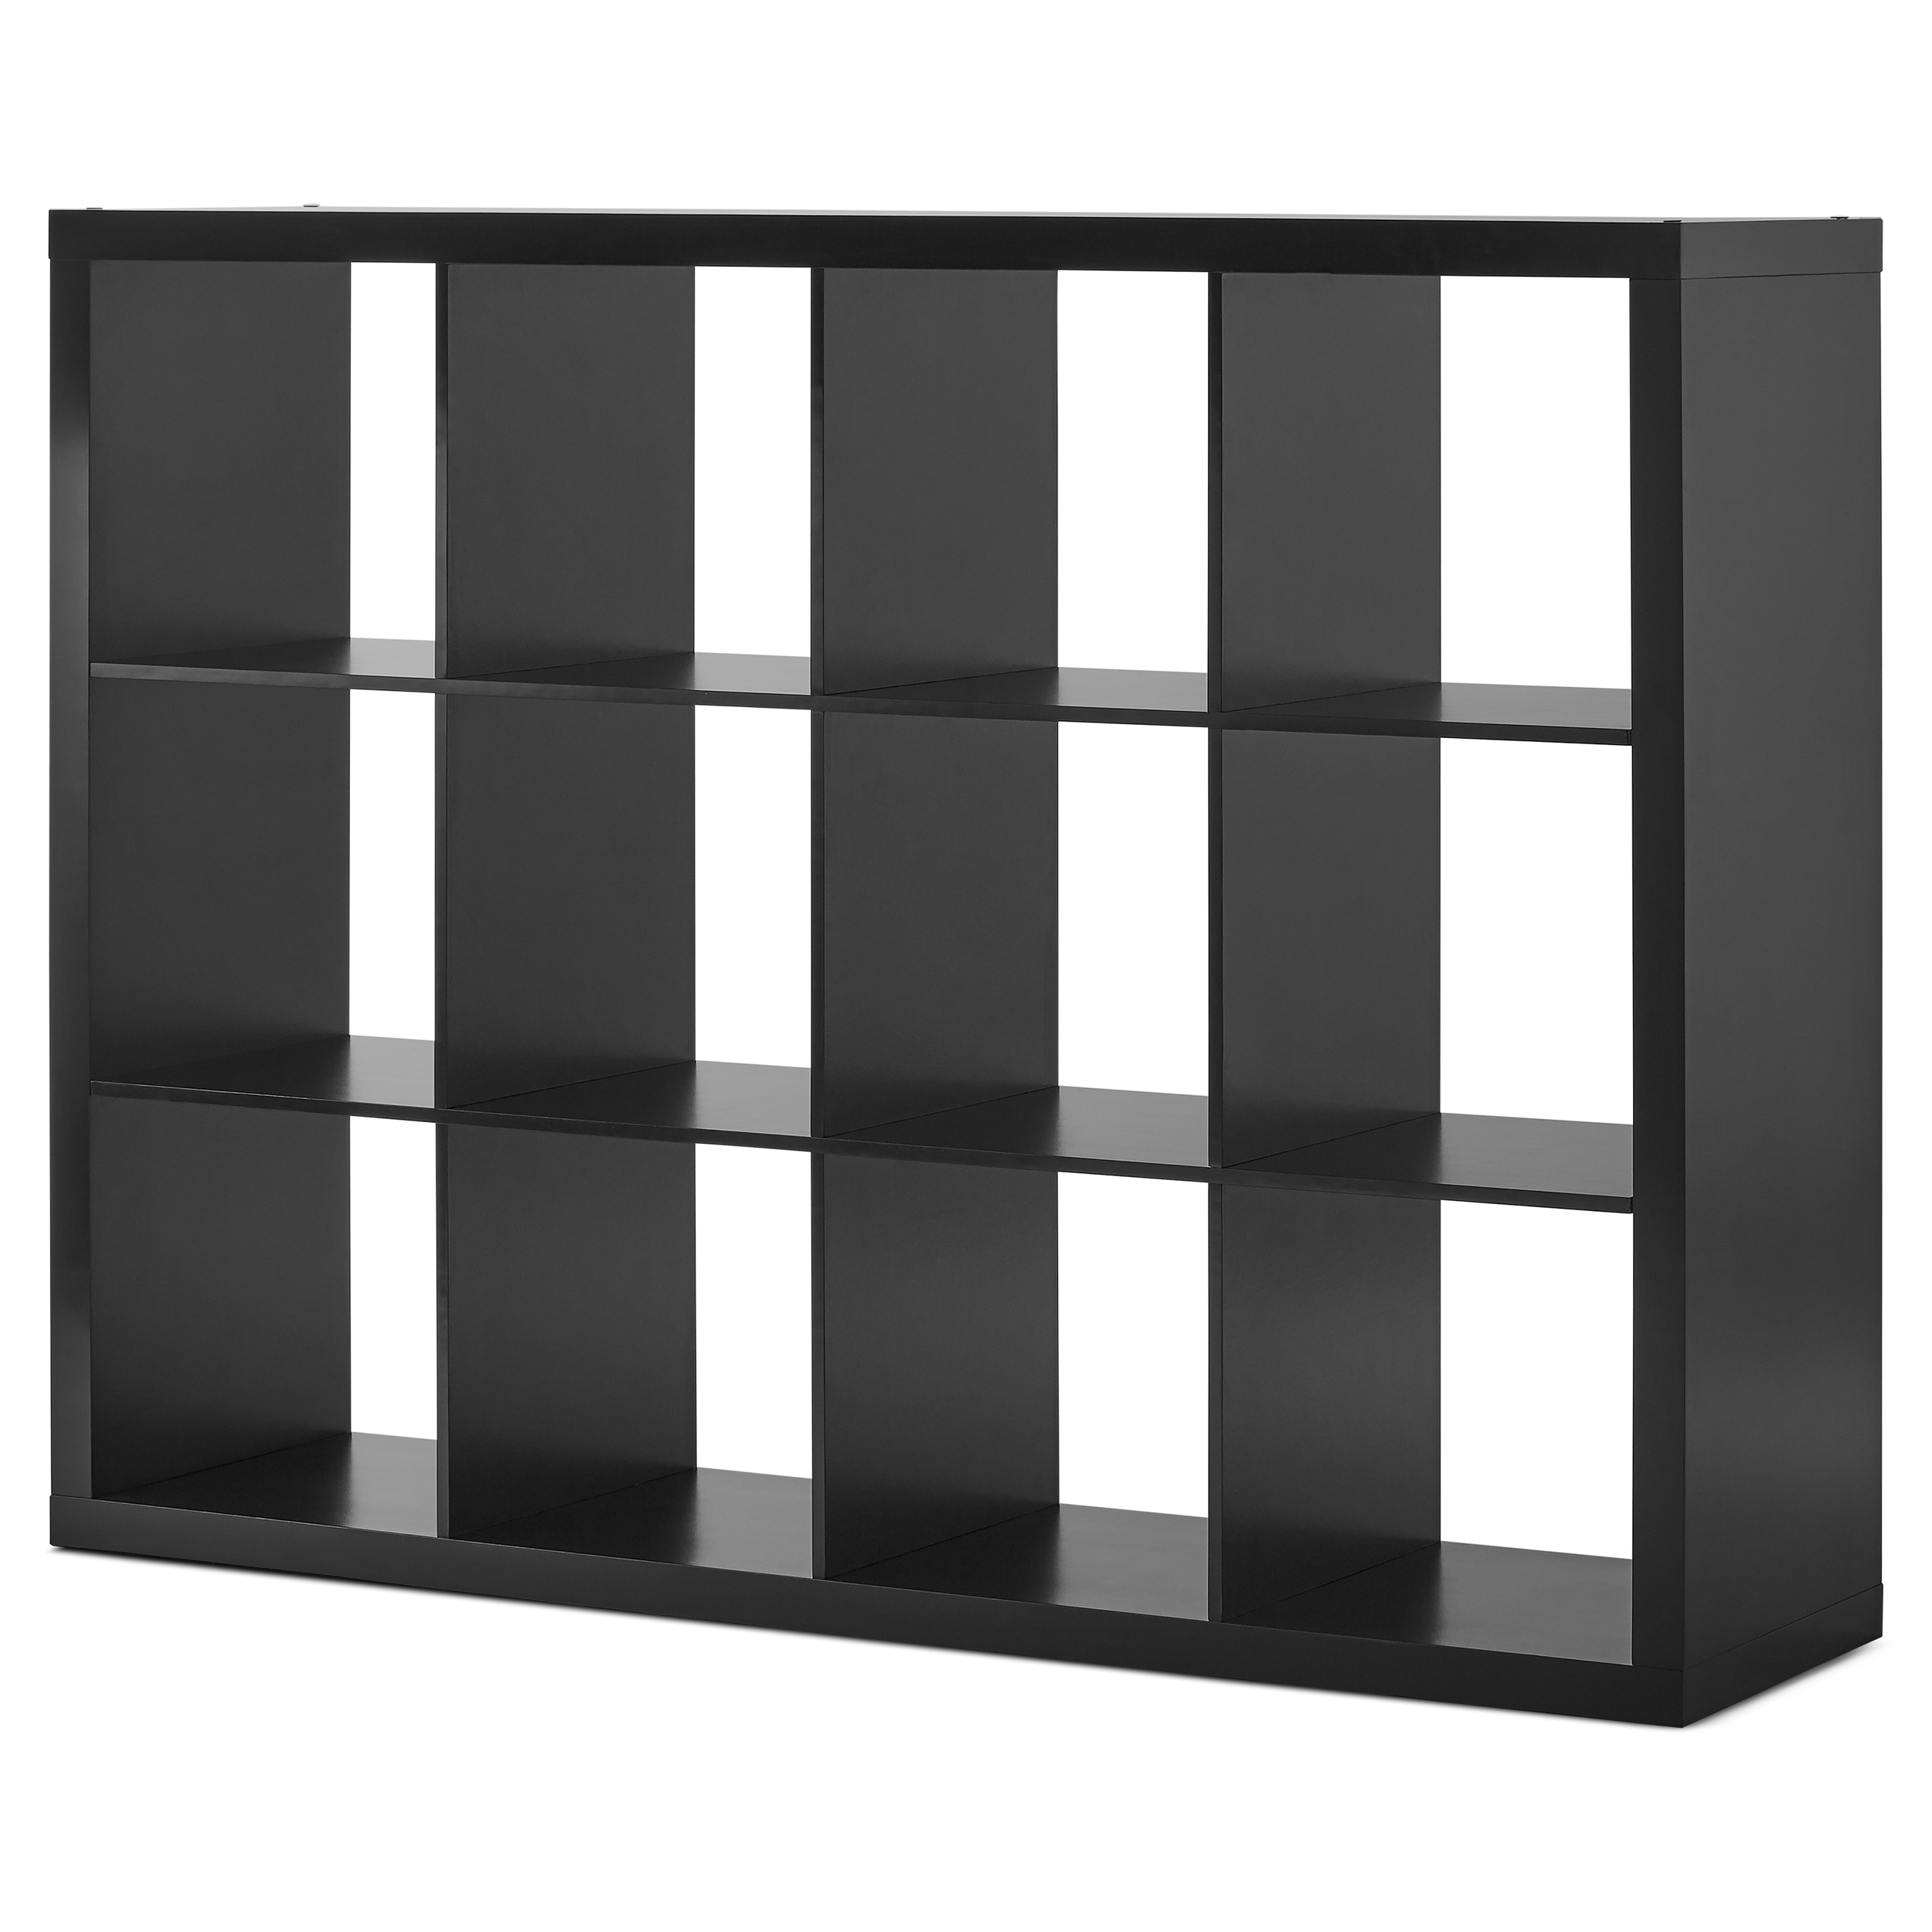 Better Homes & Gardens 12-Cube Storage Organizer, Solid Black - image 1 of 6